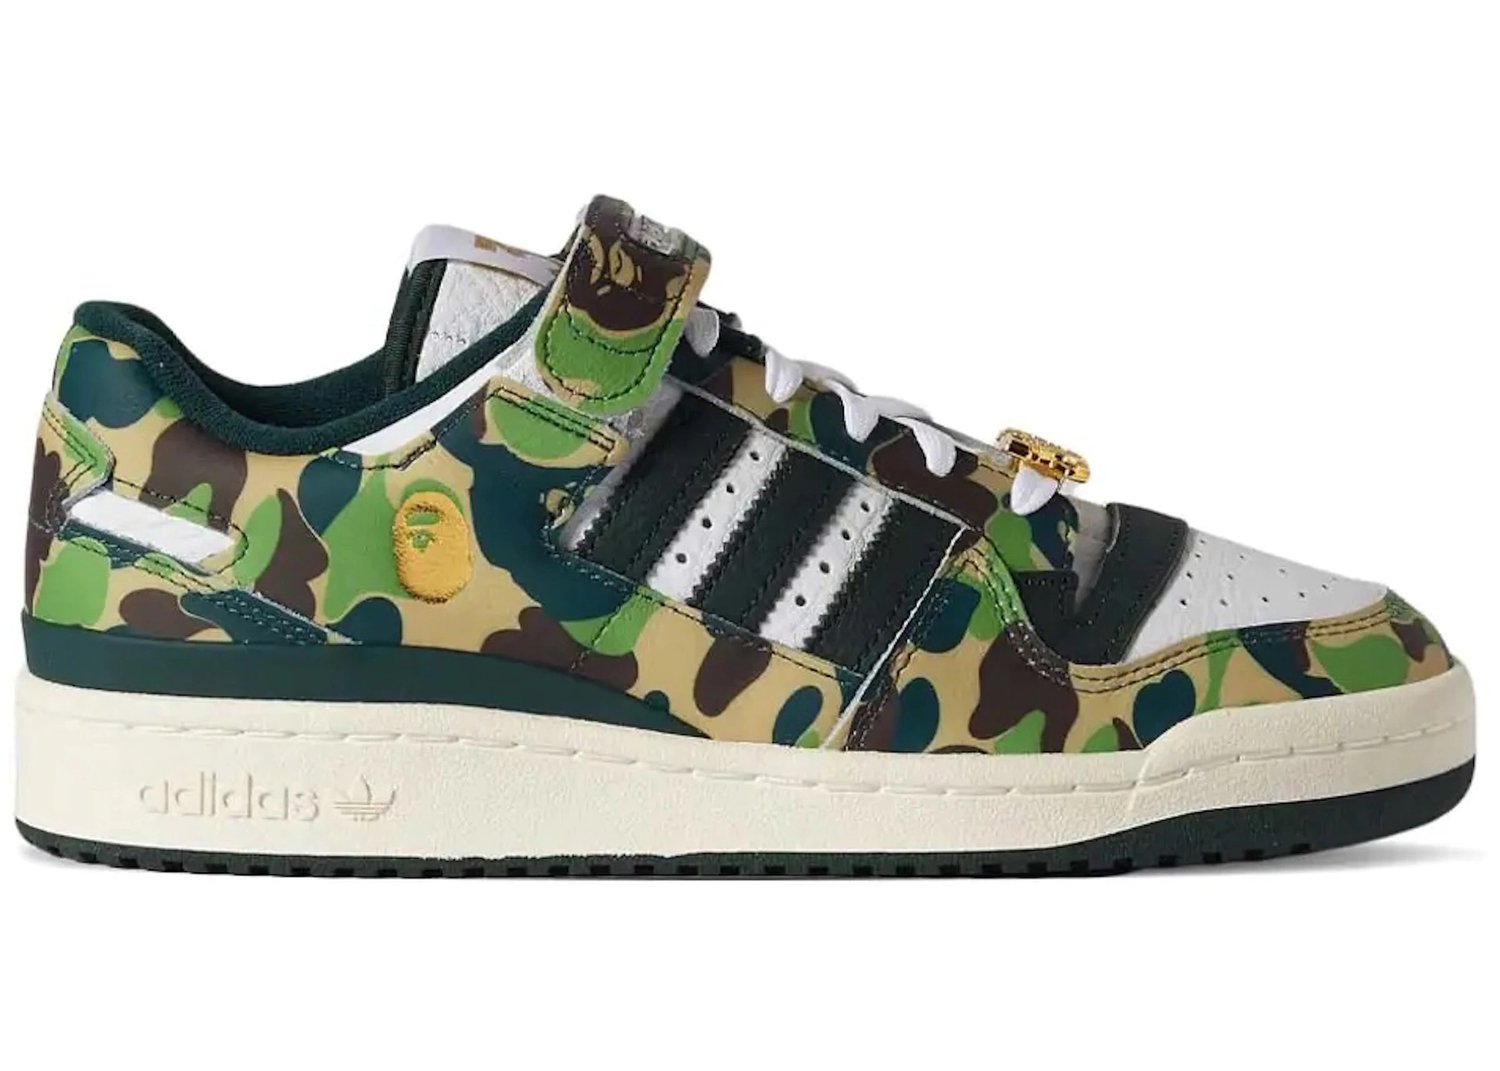 Now Available: BAPE x adidas Forum 84 Low 